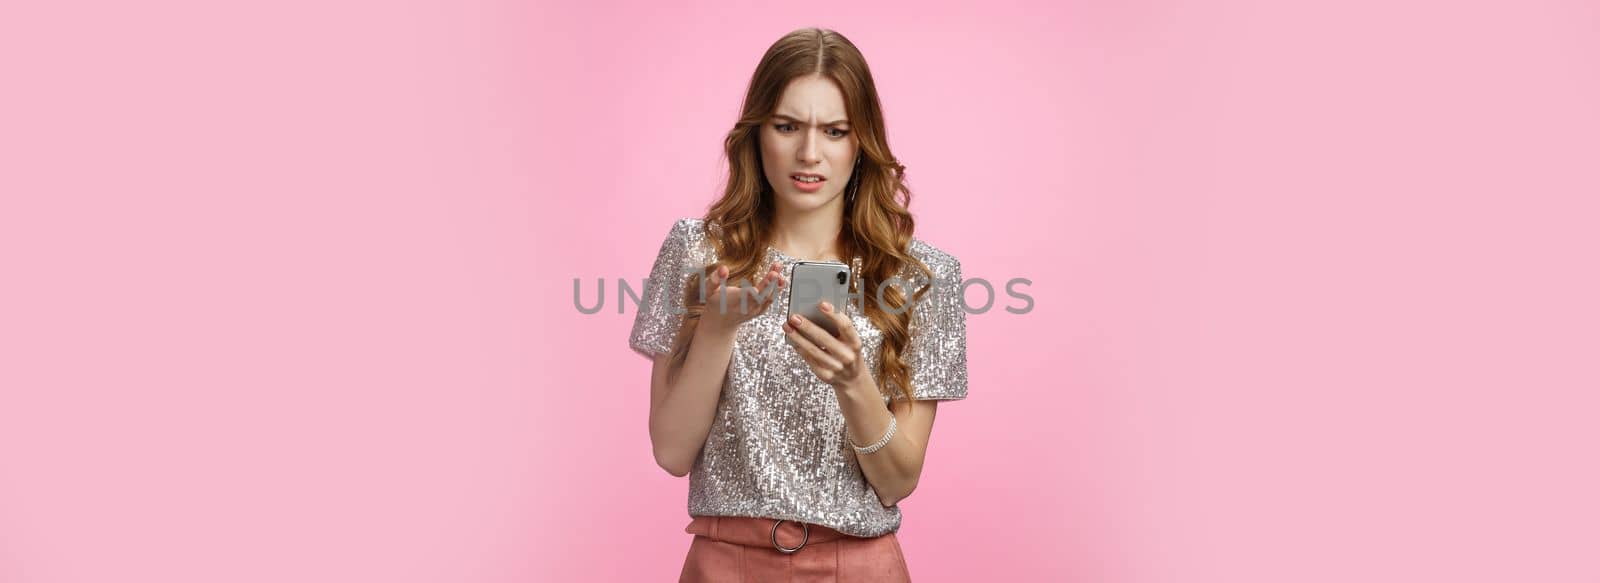 Frustrated pissed woman keep receiving strange messages cringing grimacing bothered look smartphone display gesturing irritated confused, cannot understand article, pink background by Benzoix